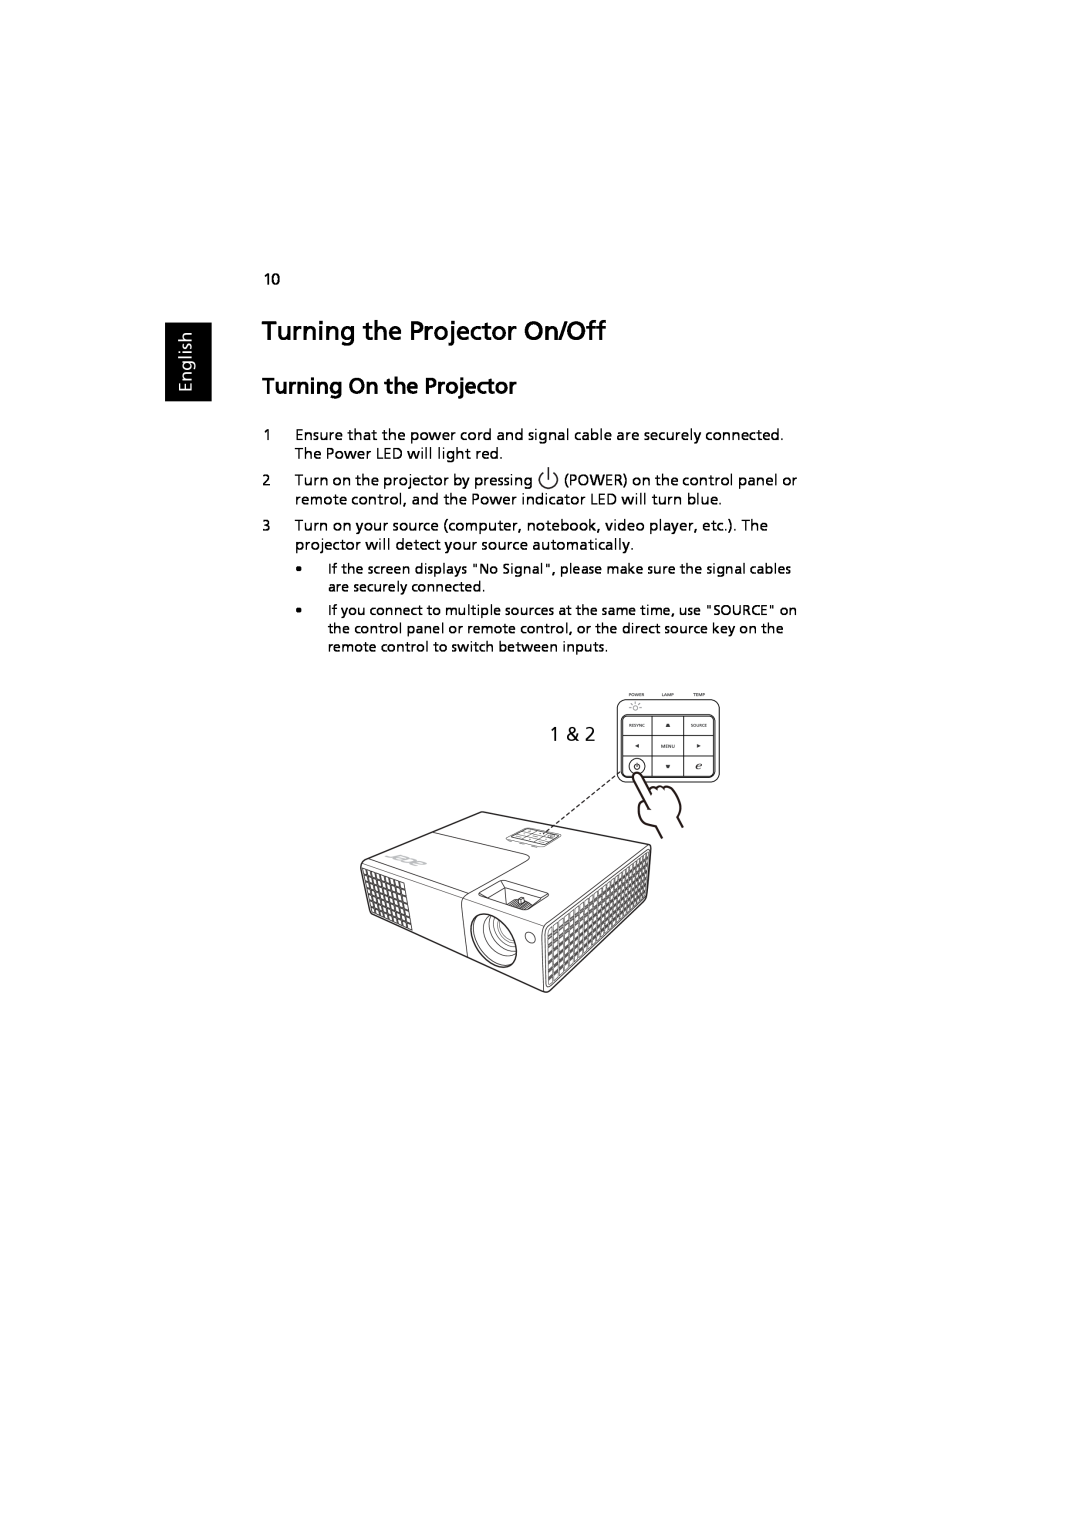 Acer MRJFZ1100A manual Turning the Projector On/Off, Turning On the Projector, English 